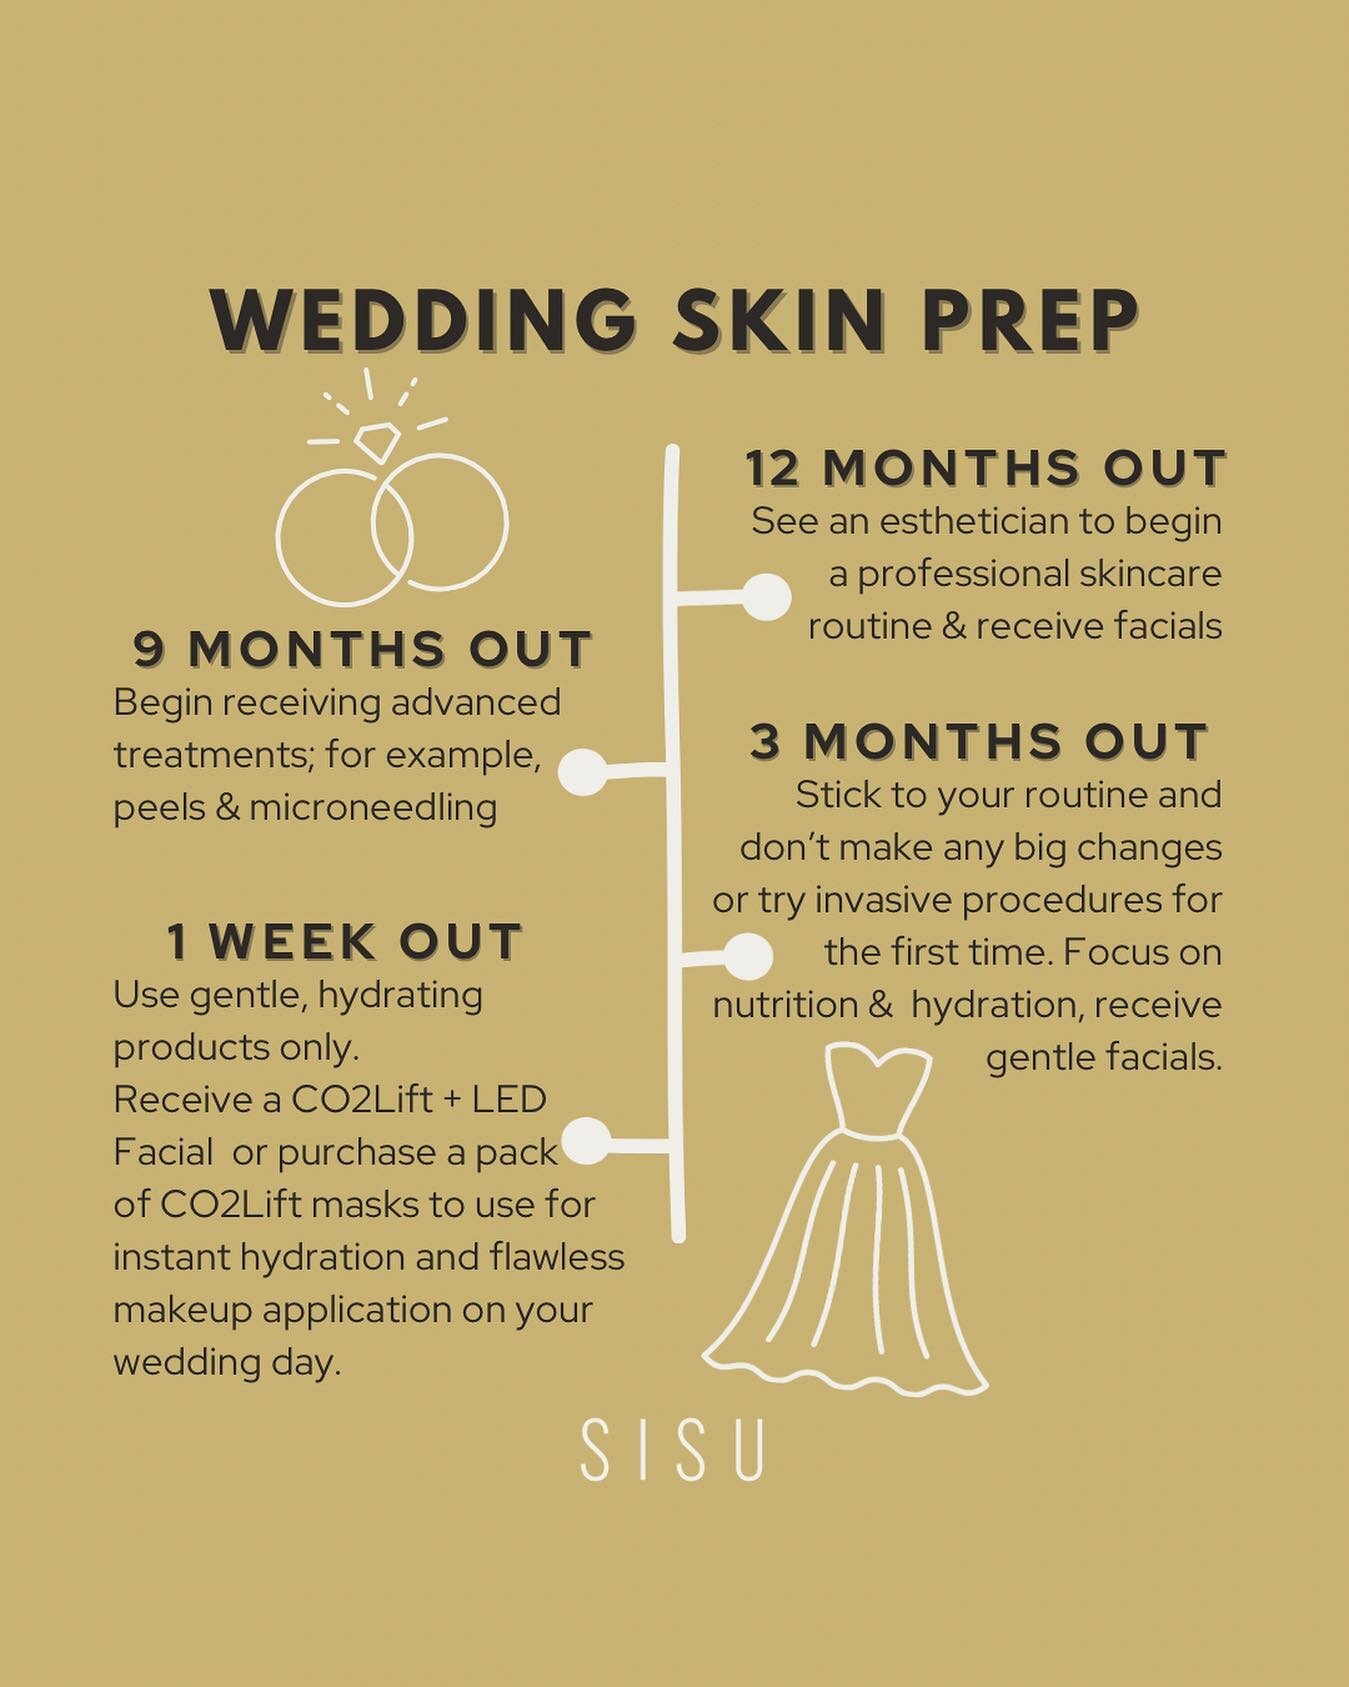 Calling all brides &amp; grooms 👰🏻 🤵🏻 

If you&rsquo;re getting married, the time to start preparing your skin for your wedding day is NOW. 

Results take time, so I made this simple wedding prep guide for your to follow in order to have your bes